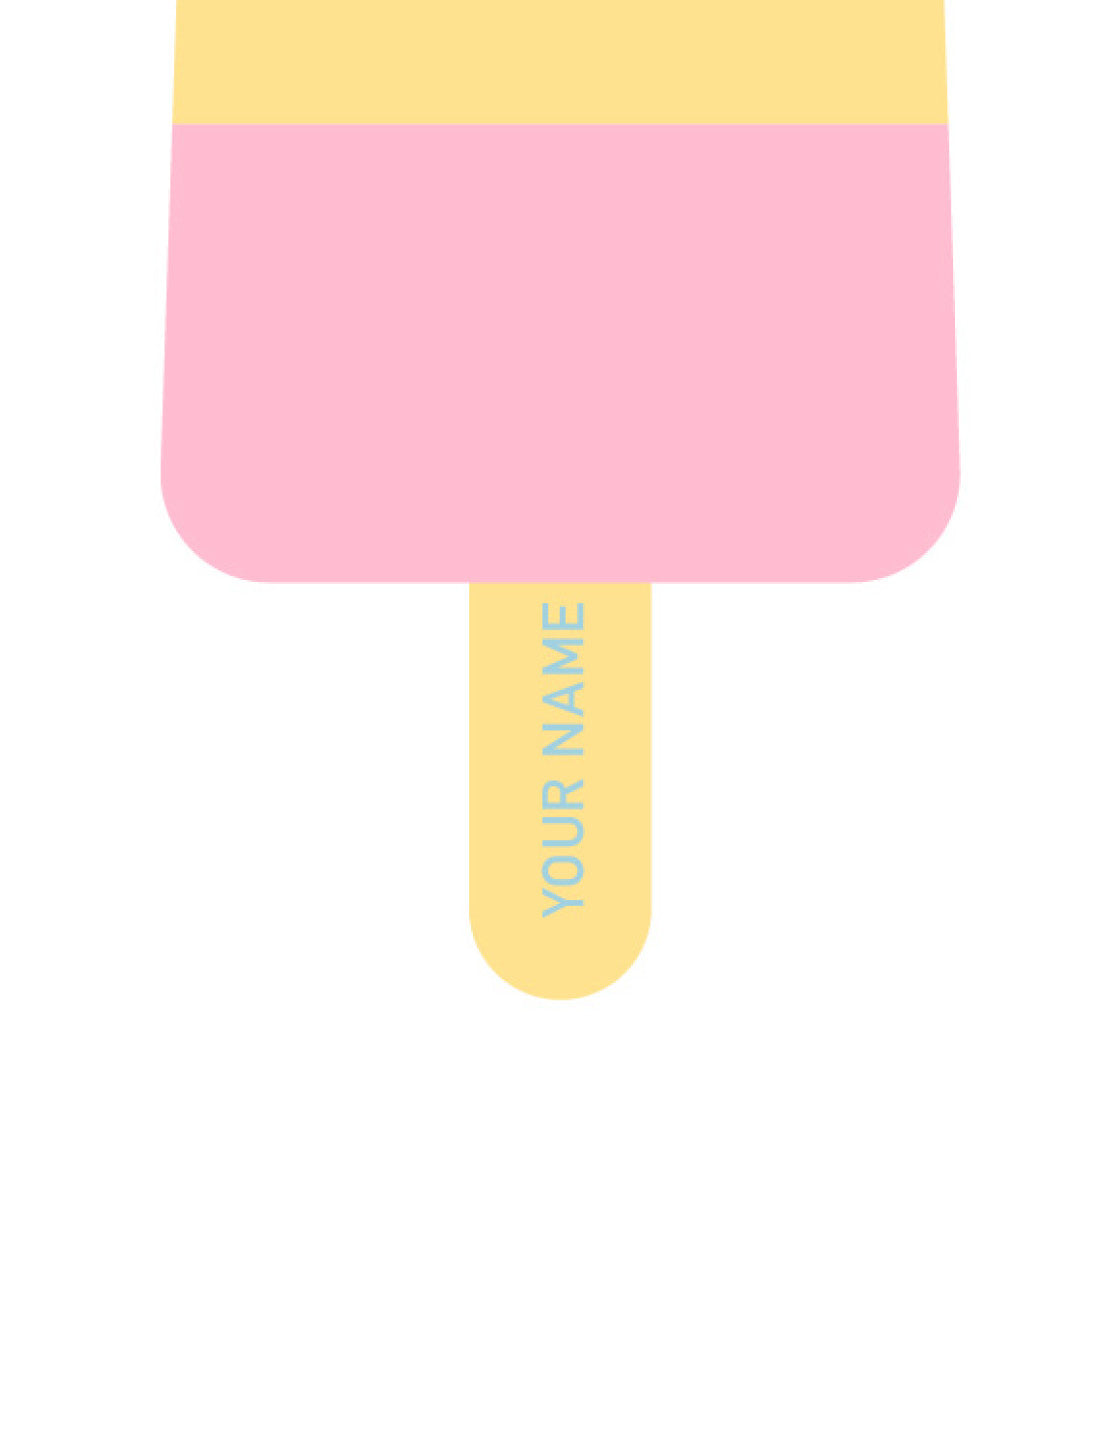 fab ice lolly print in pink, yellow and green with Personalised name on yellow stick